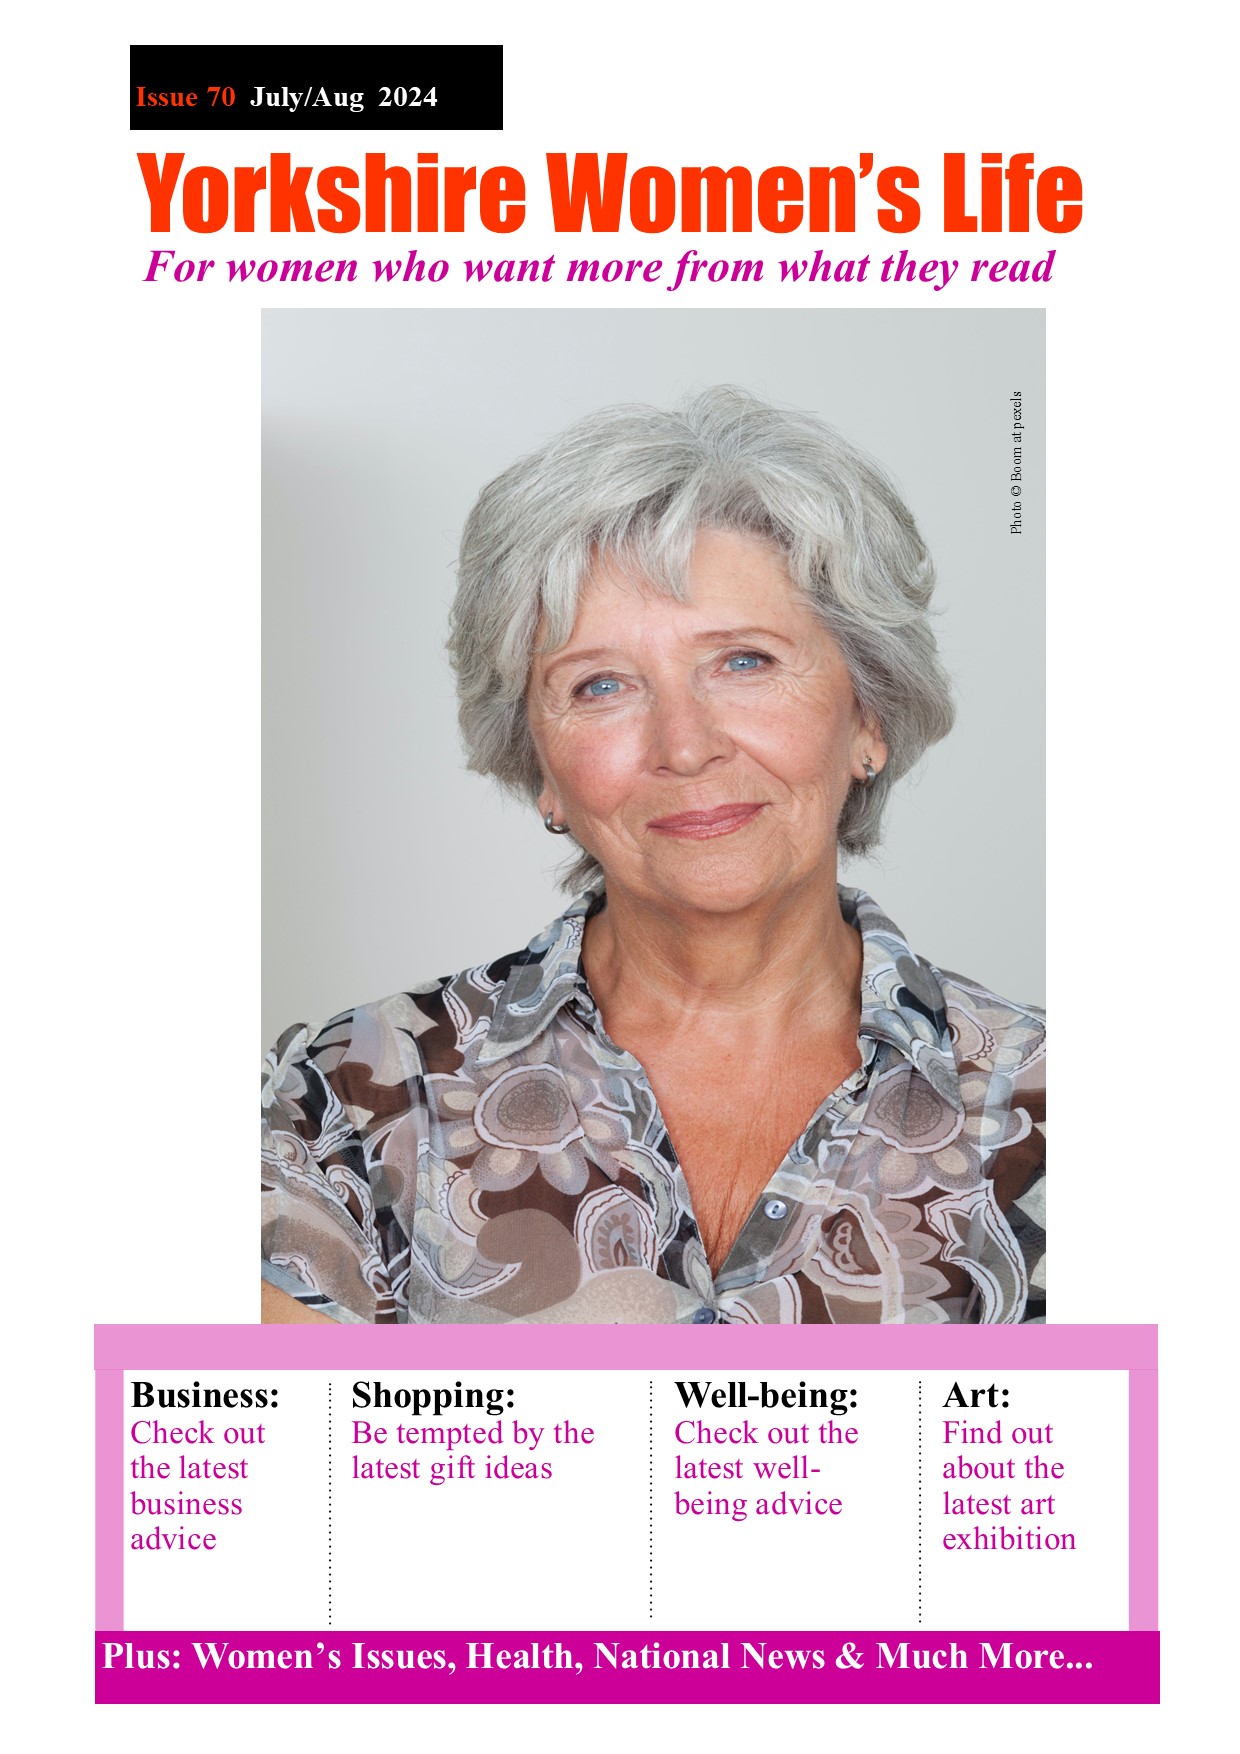 ''Embrace Your Gray'': Yorkshire Women's Life Magazine Celebrates Aging and Natural Beauty on the New Front Cover